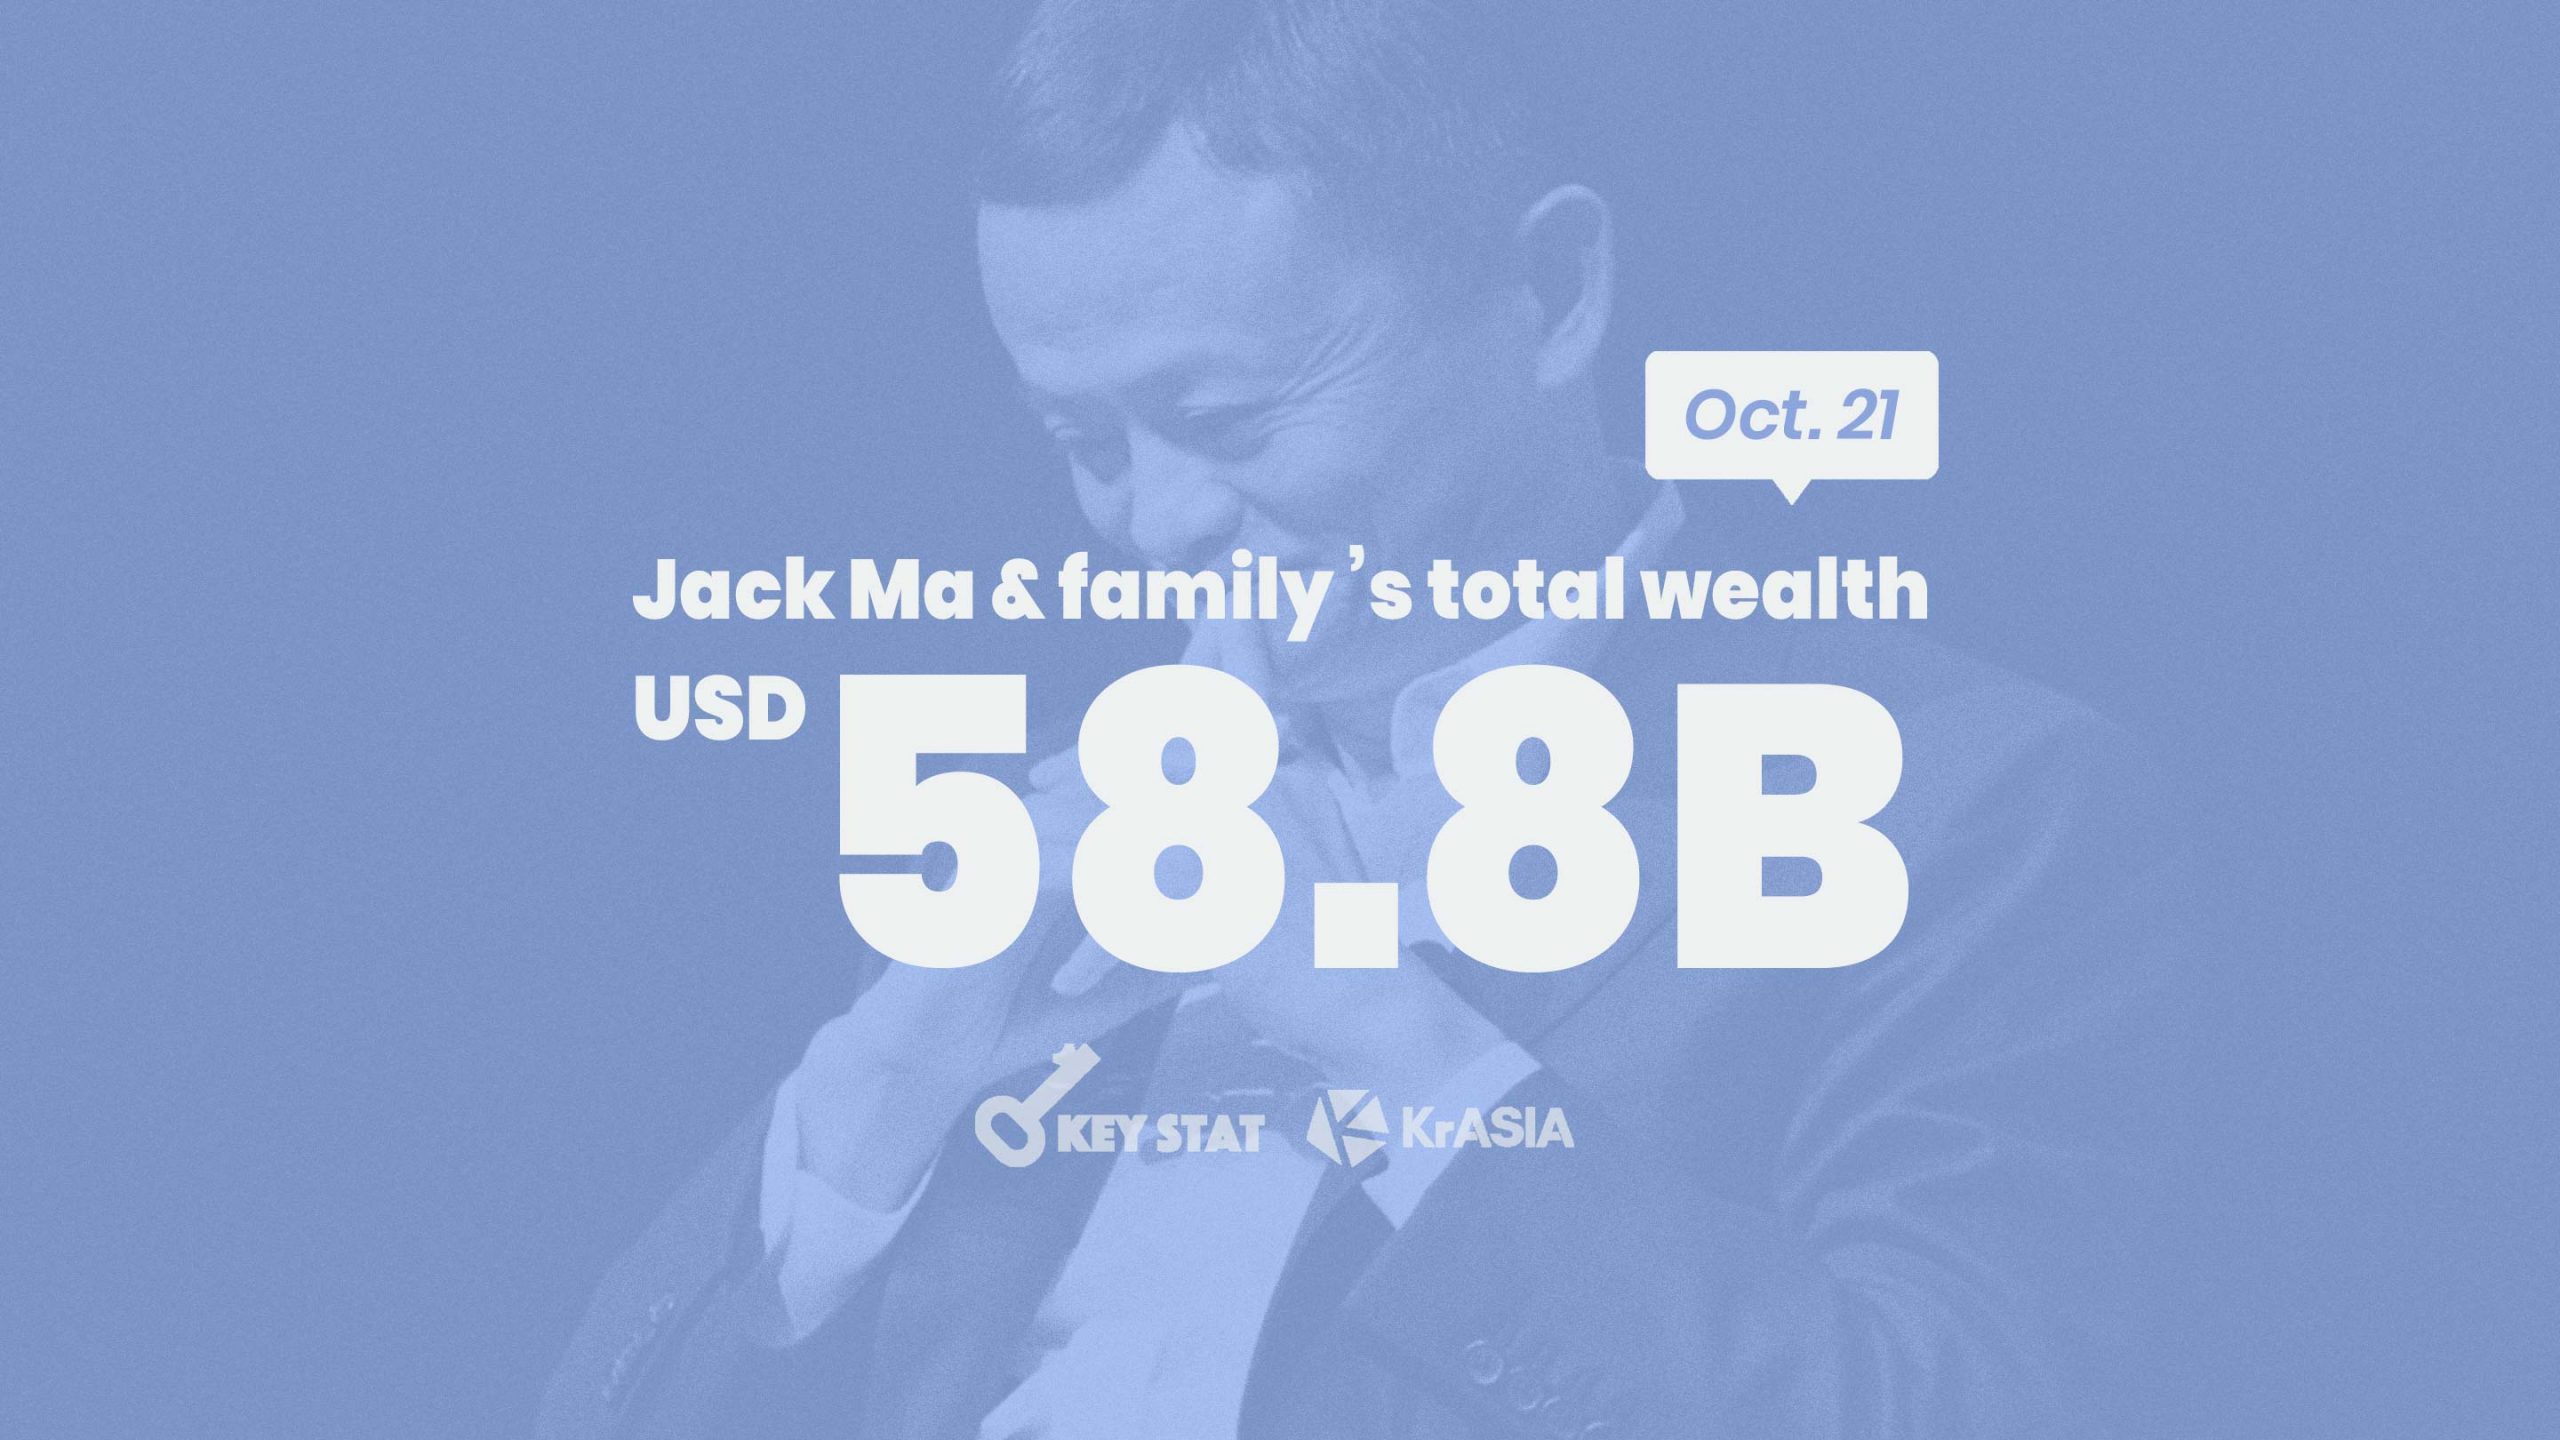 KEY STAT | Alibaba’s Jack Ma retains title of richest man in China for the third year